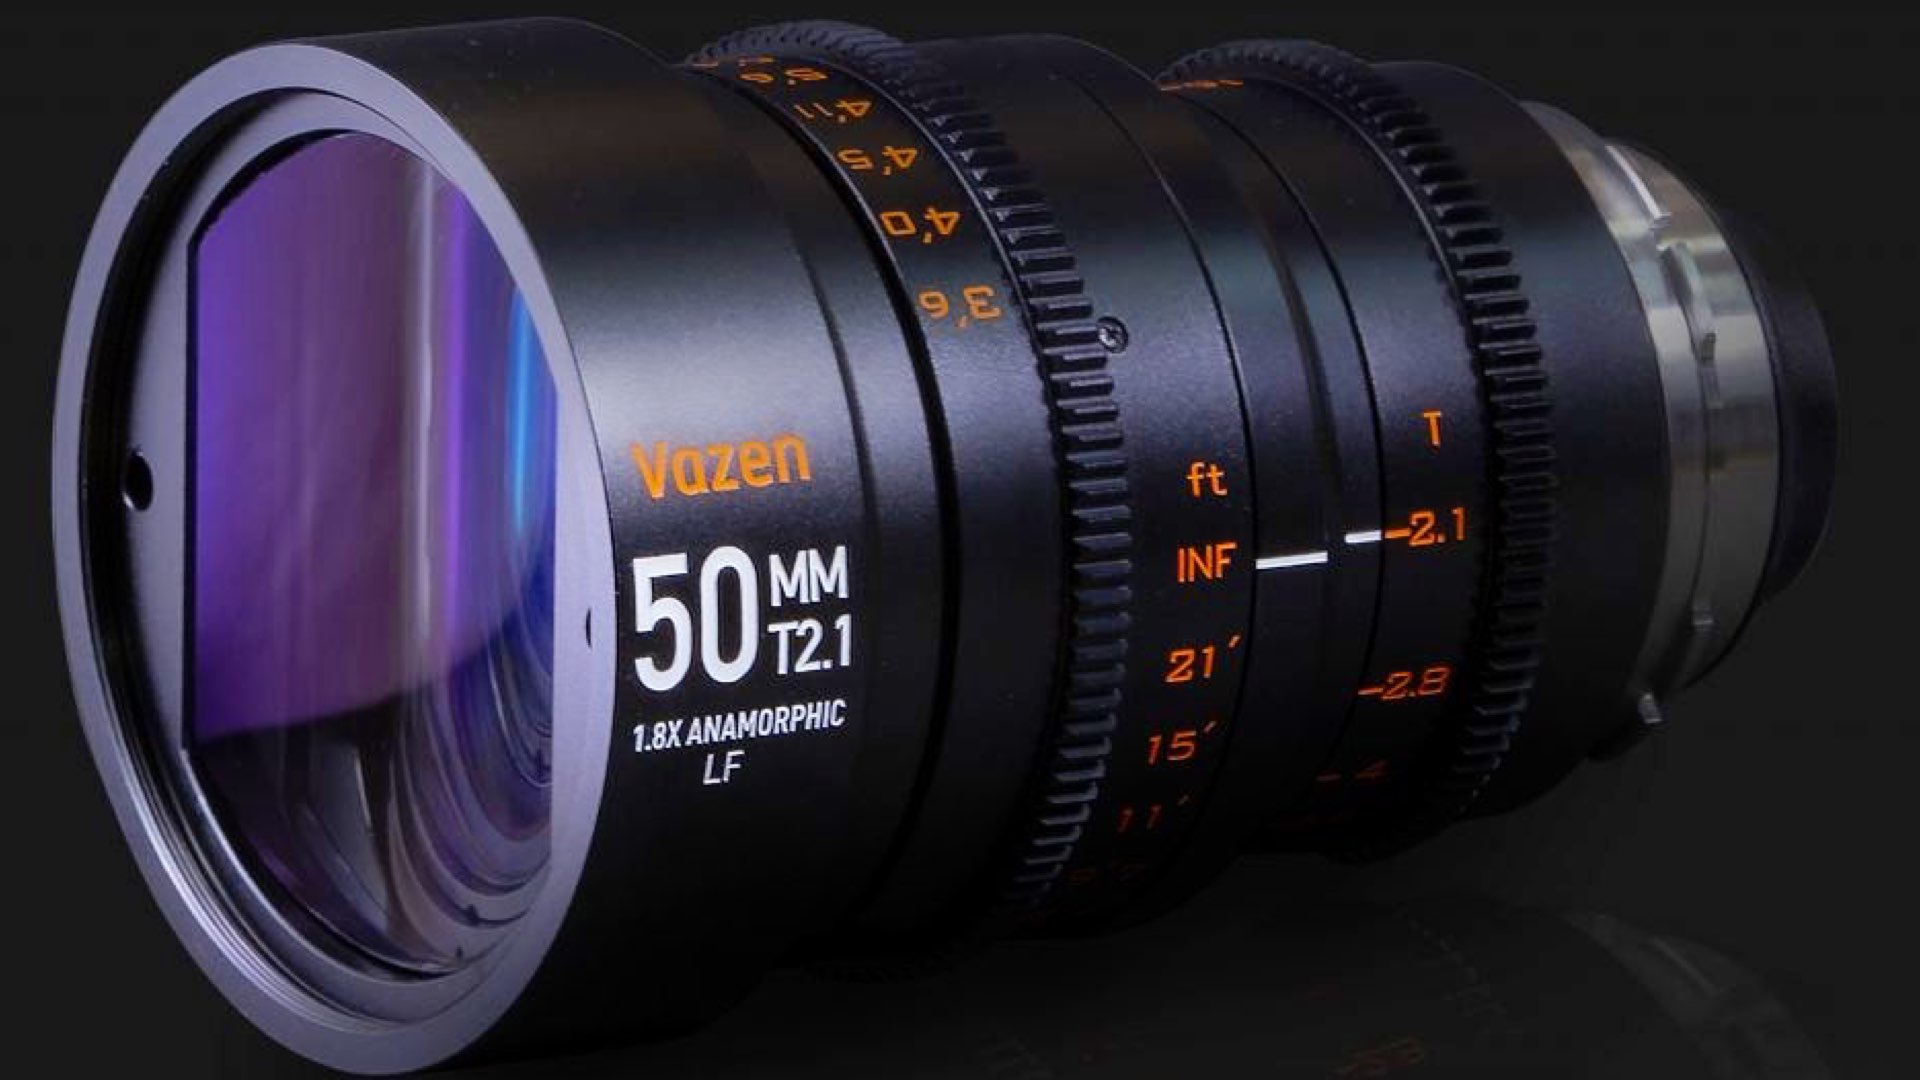 Vazen Introduces a 50mm 1.8X Anamorphic Lens for Full-Frame Cameras